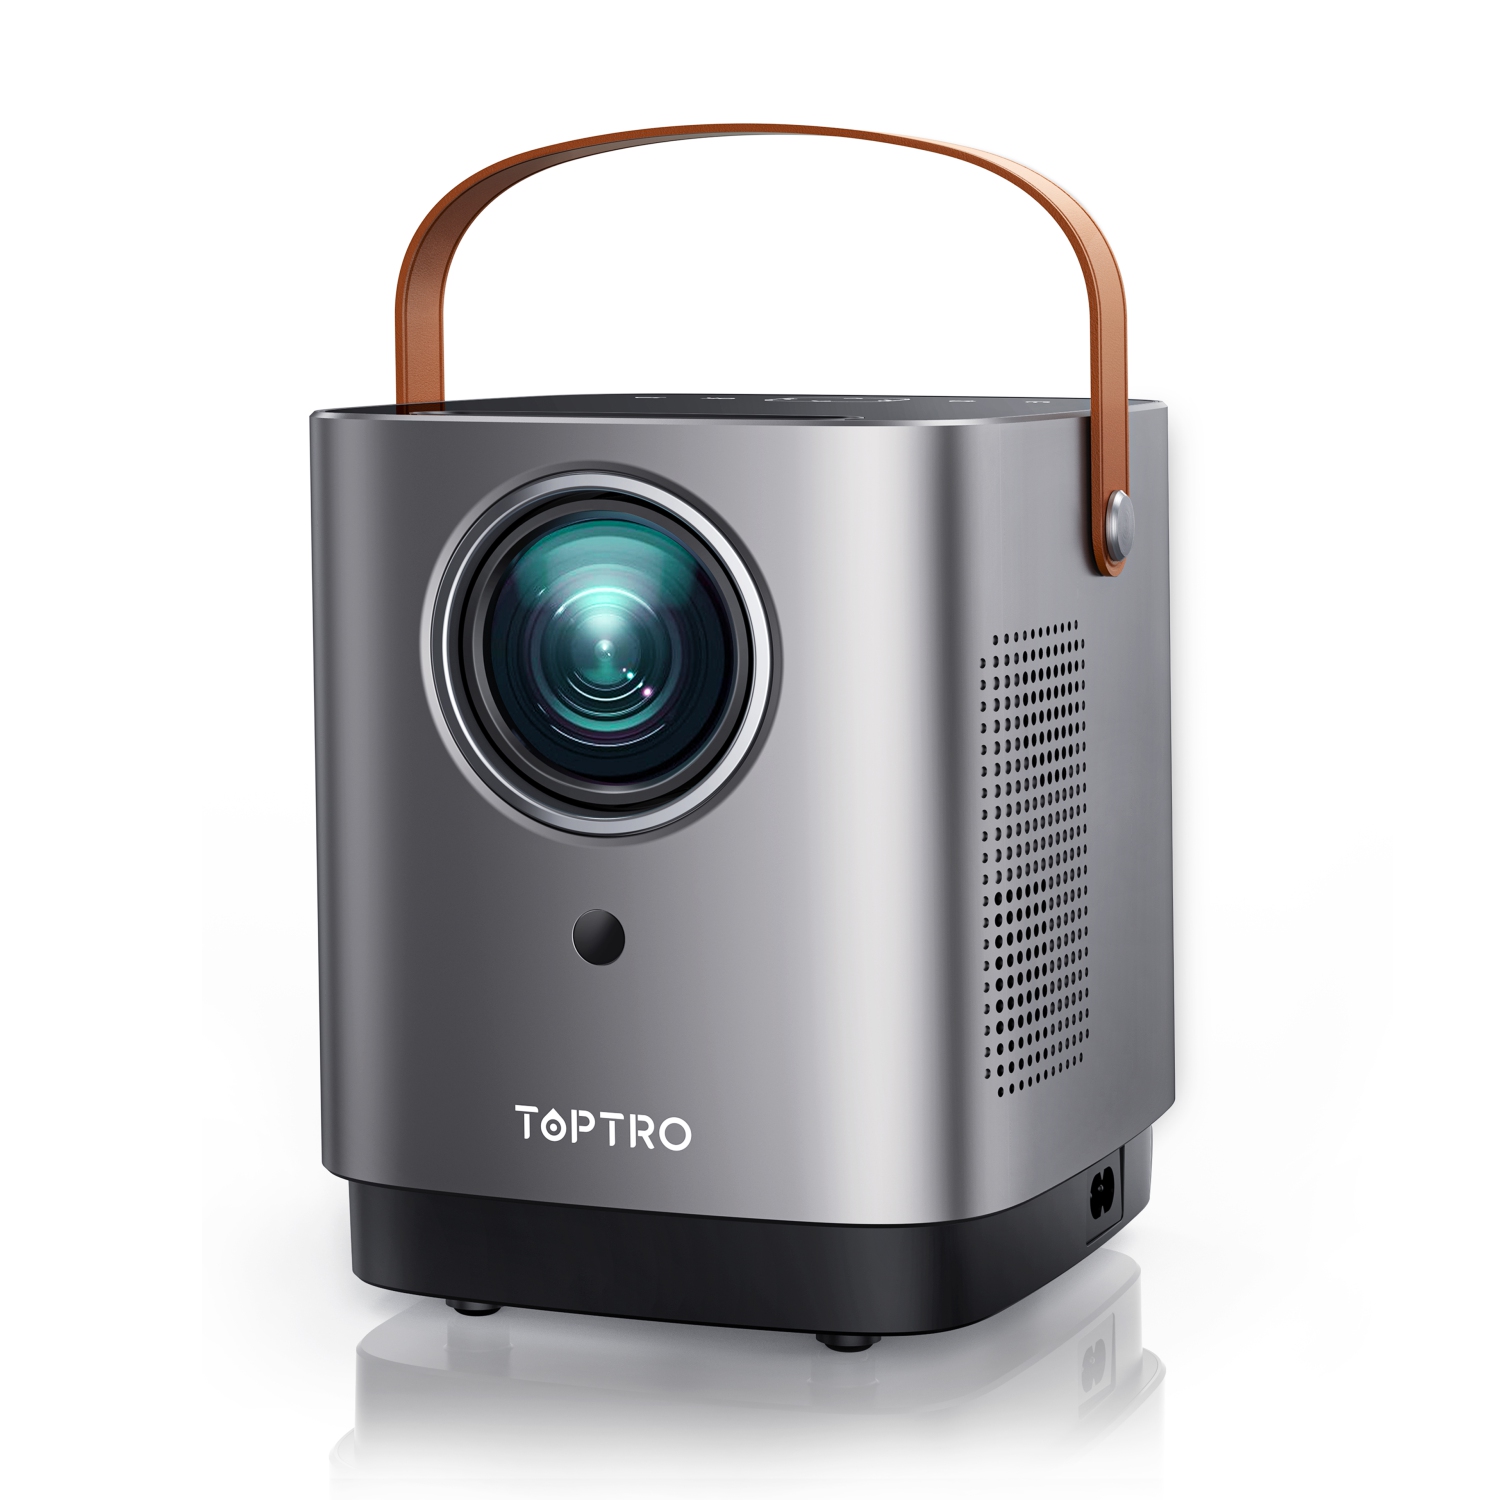 TOPTRO Mini Projector, TR23 5G WiFi Bluetooth Projector, 12000 Lumen 1080P Supported, Portable LCD Home Movie Projector, Outdoor Theater Projector, Top Choice for Gift